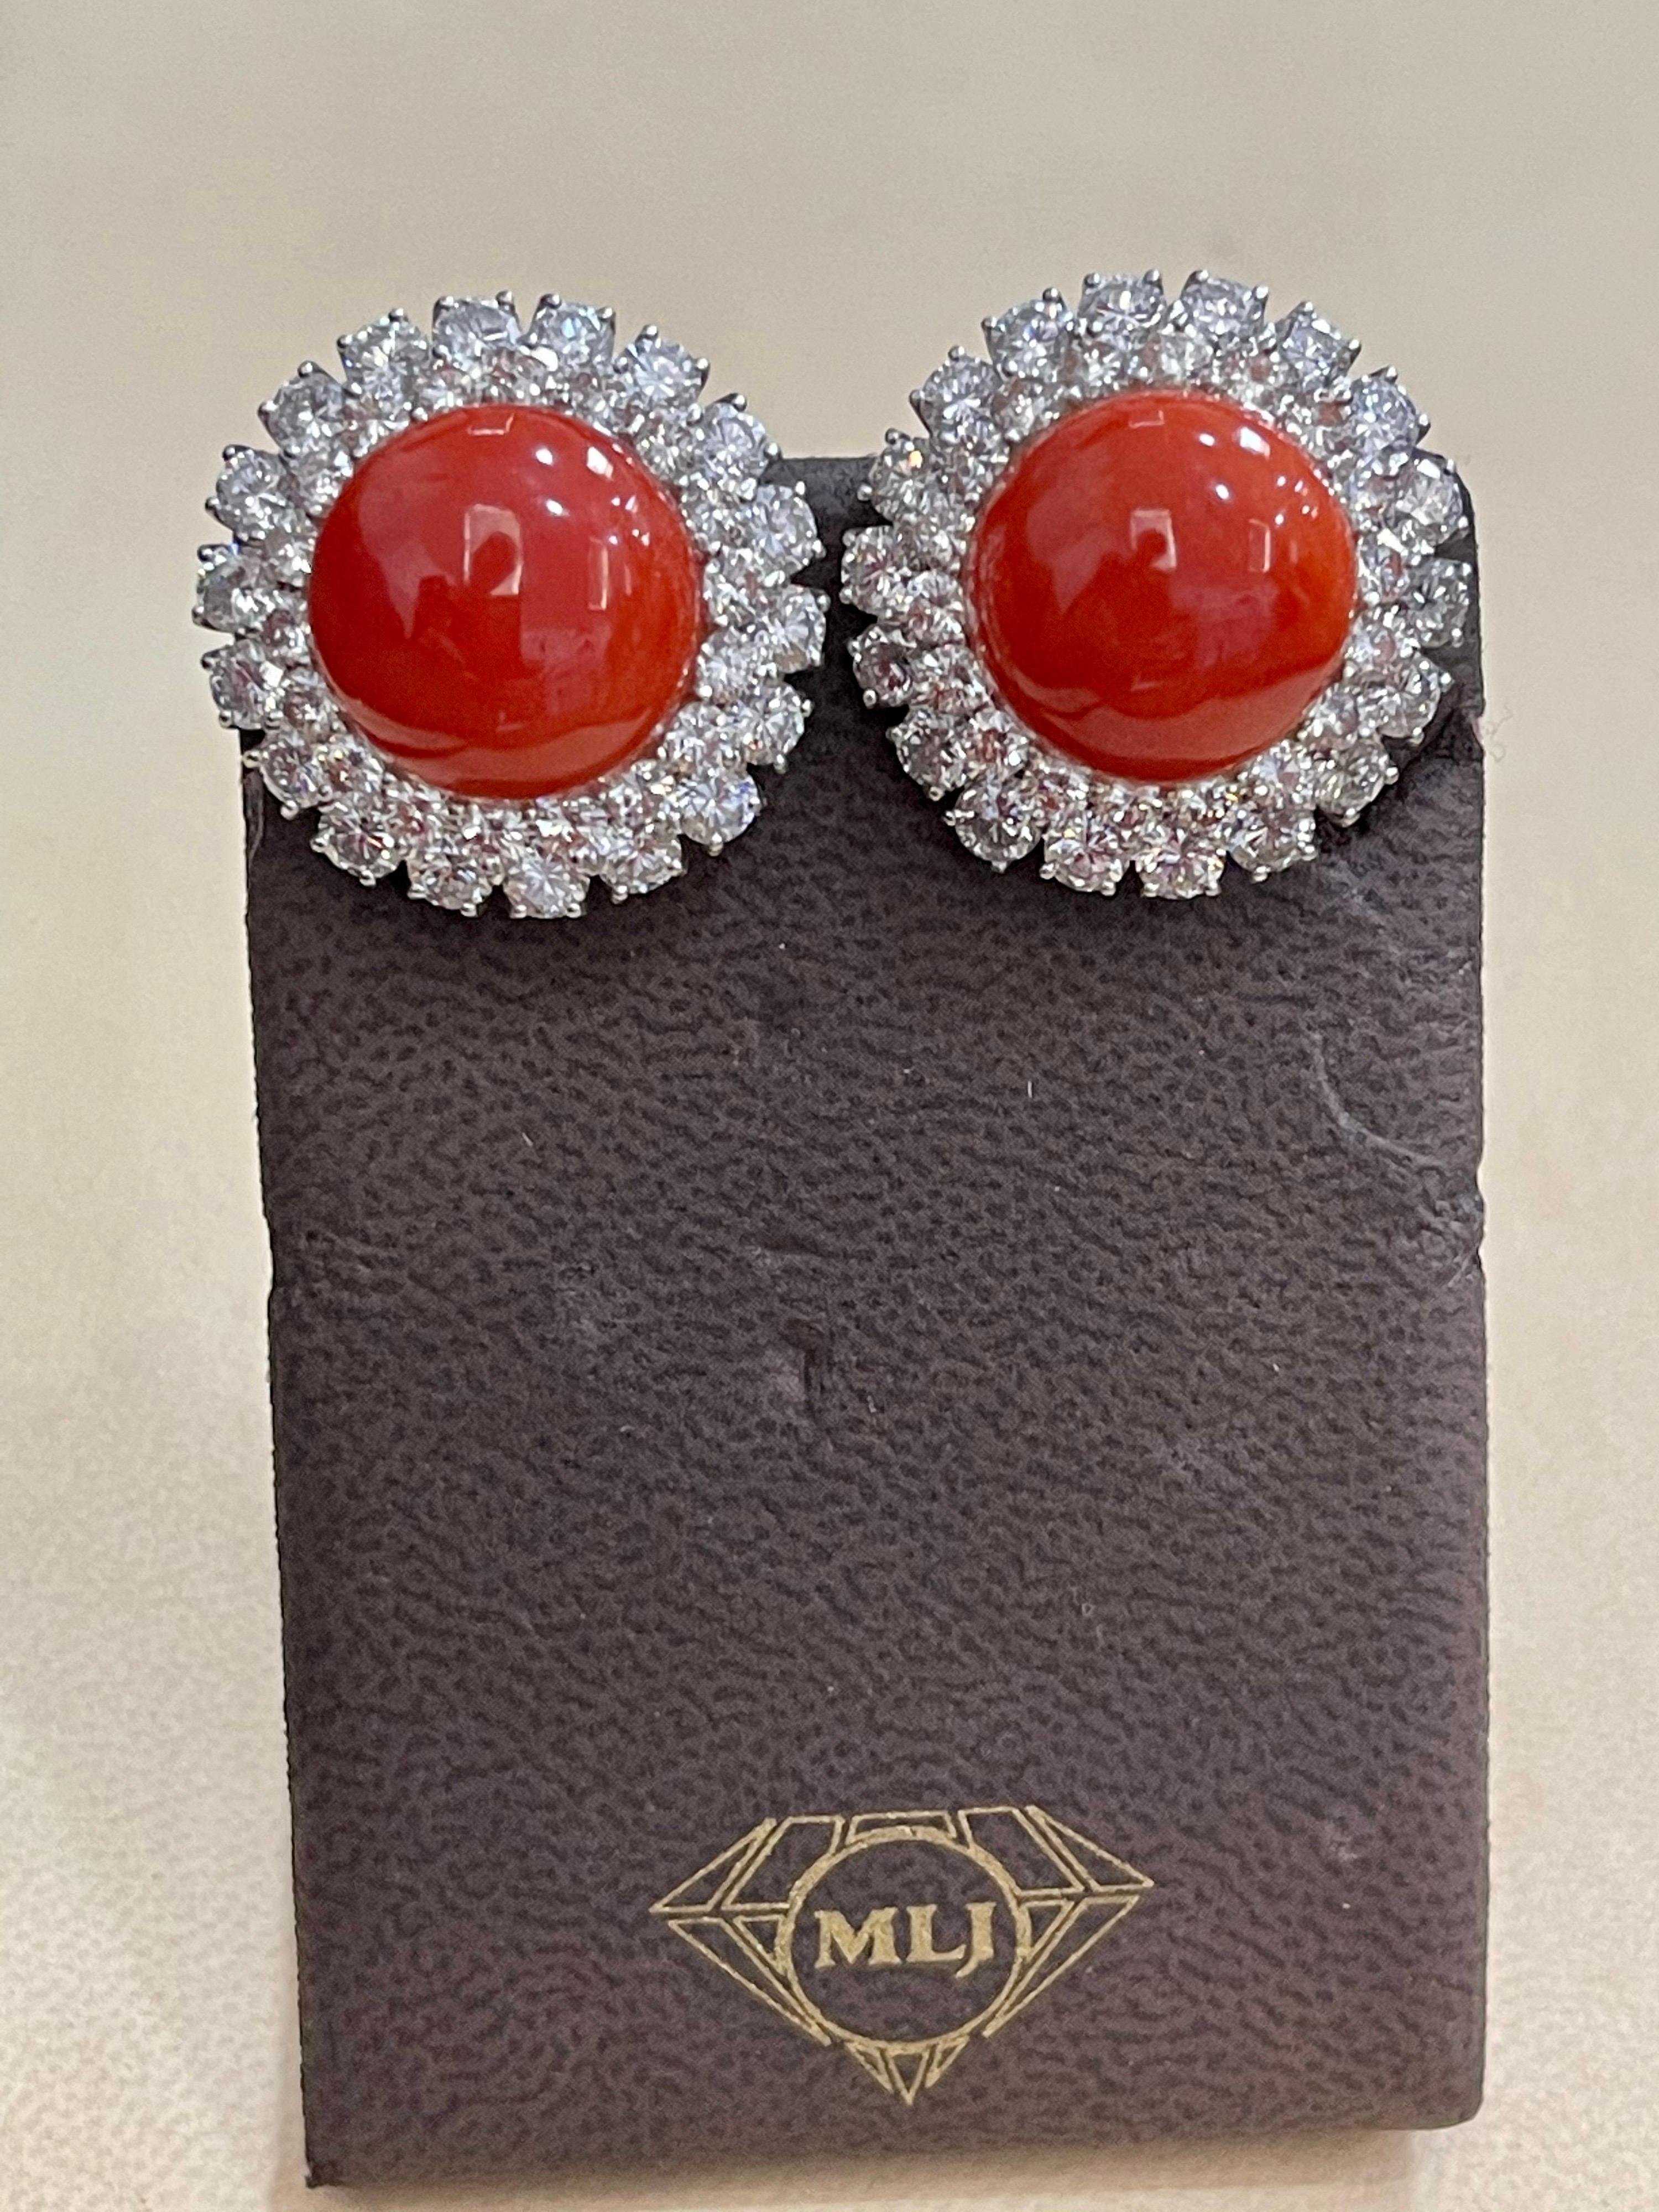 35 Carat Natural Coral and 12 Carat DeBeers Diamond Cocktail Earring in Platinum For Sale 6